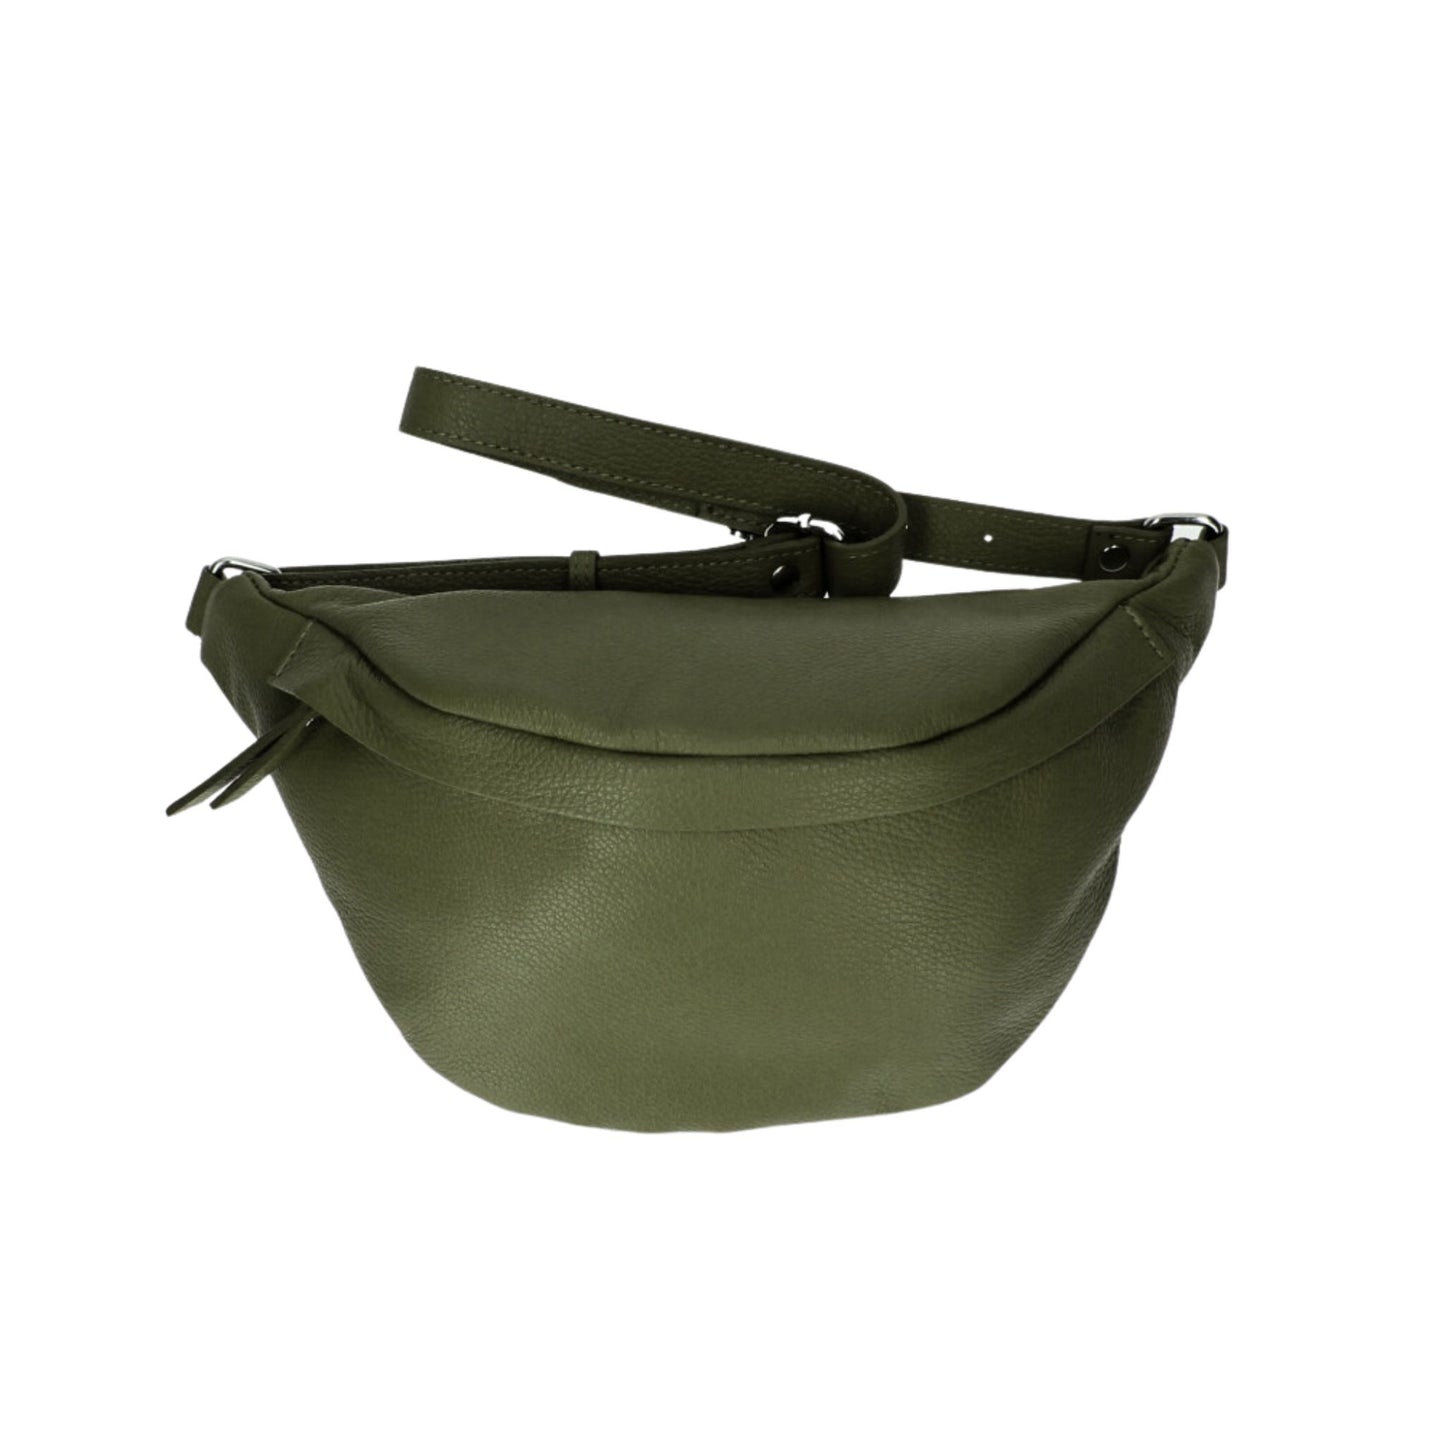 Fashionable olive leather crossbody bag with a buckle strap and main zipped compartment.